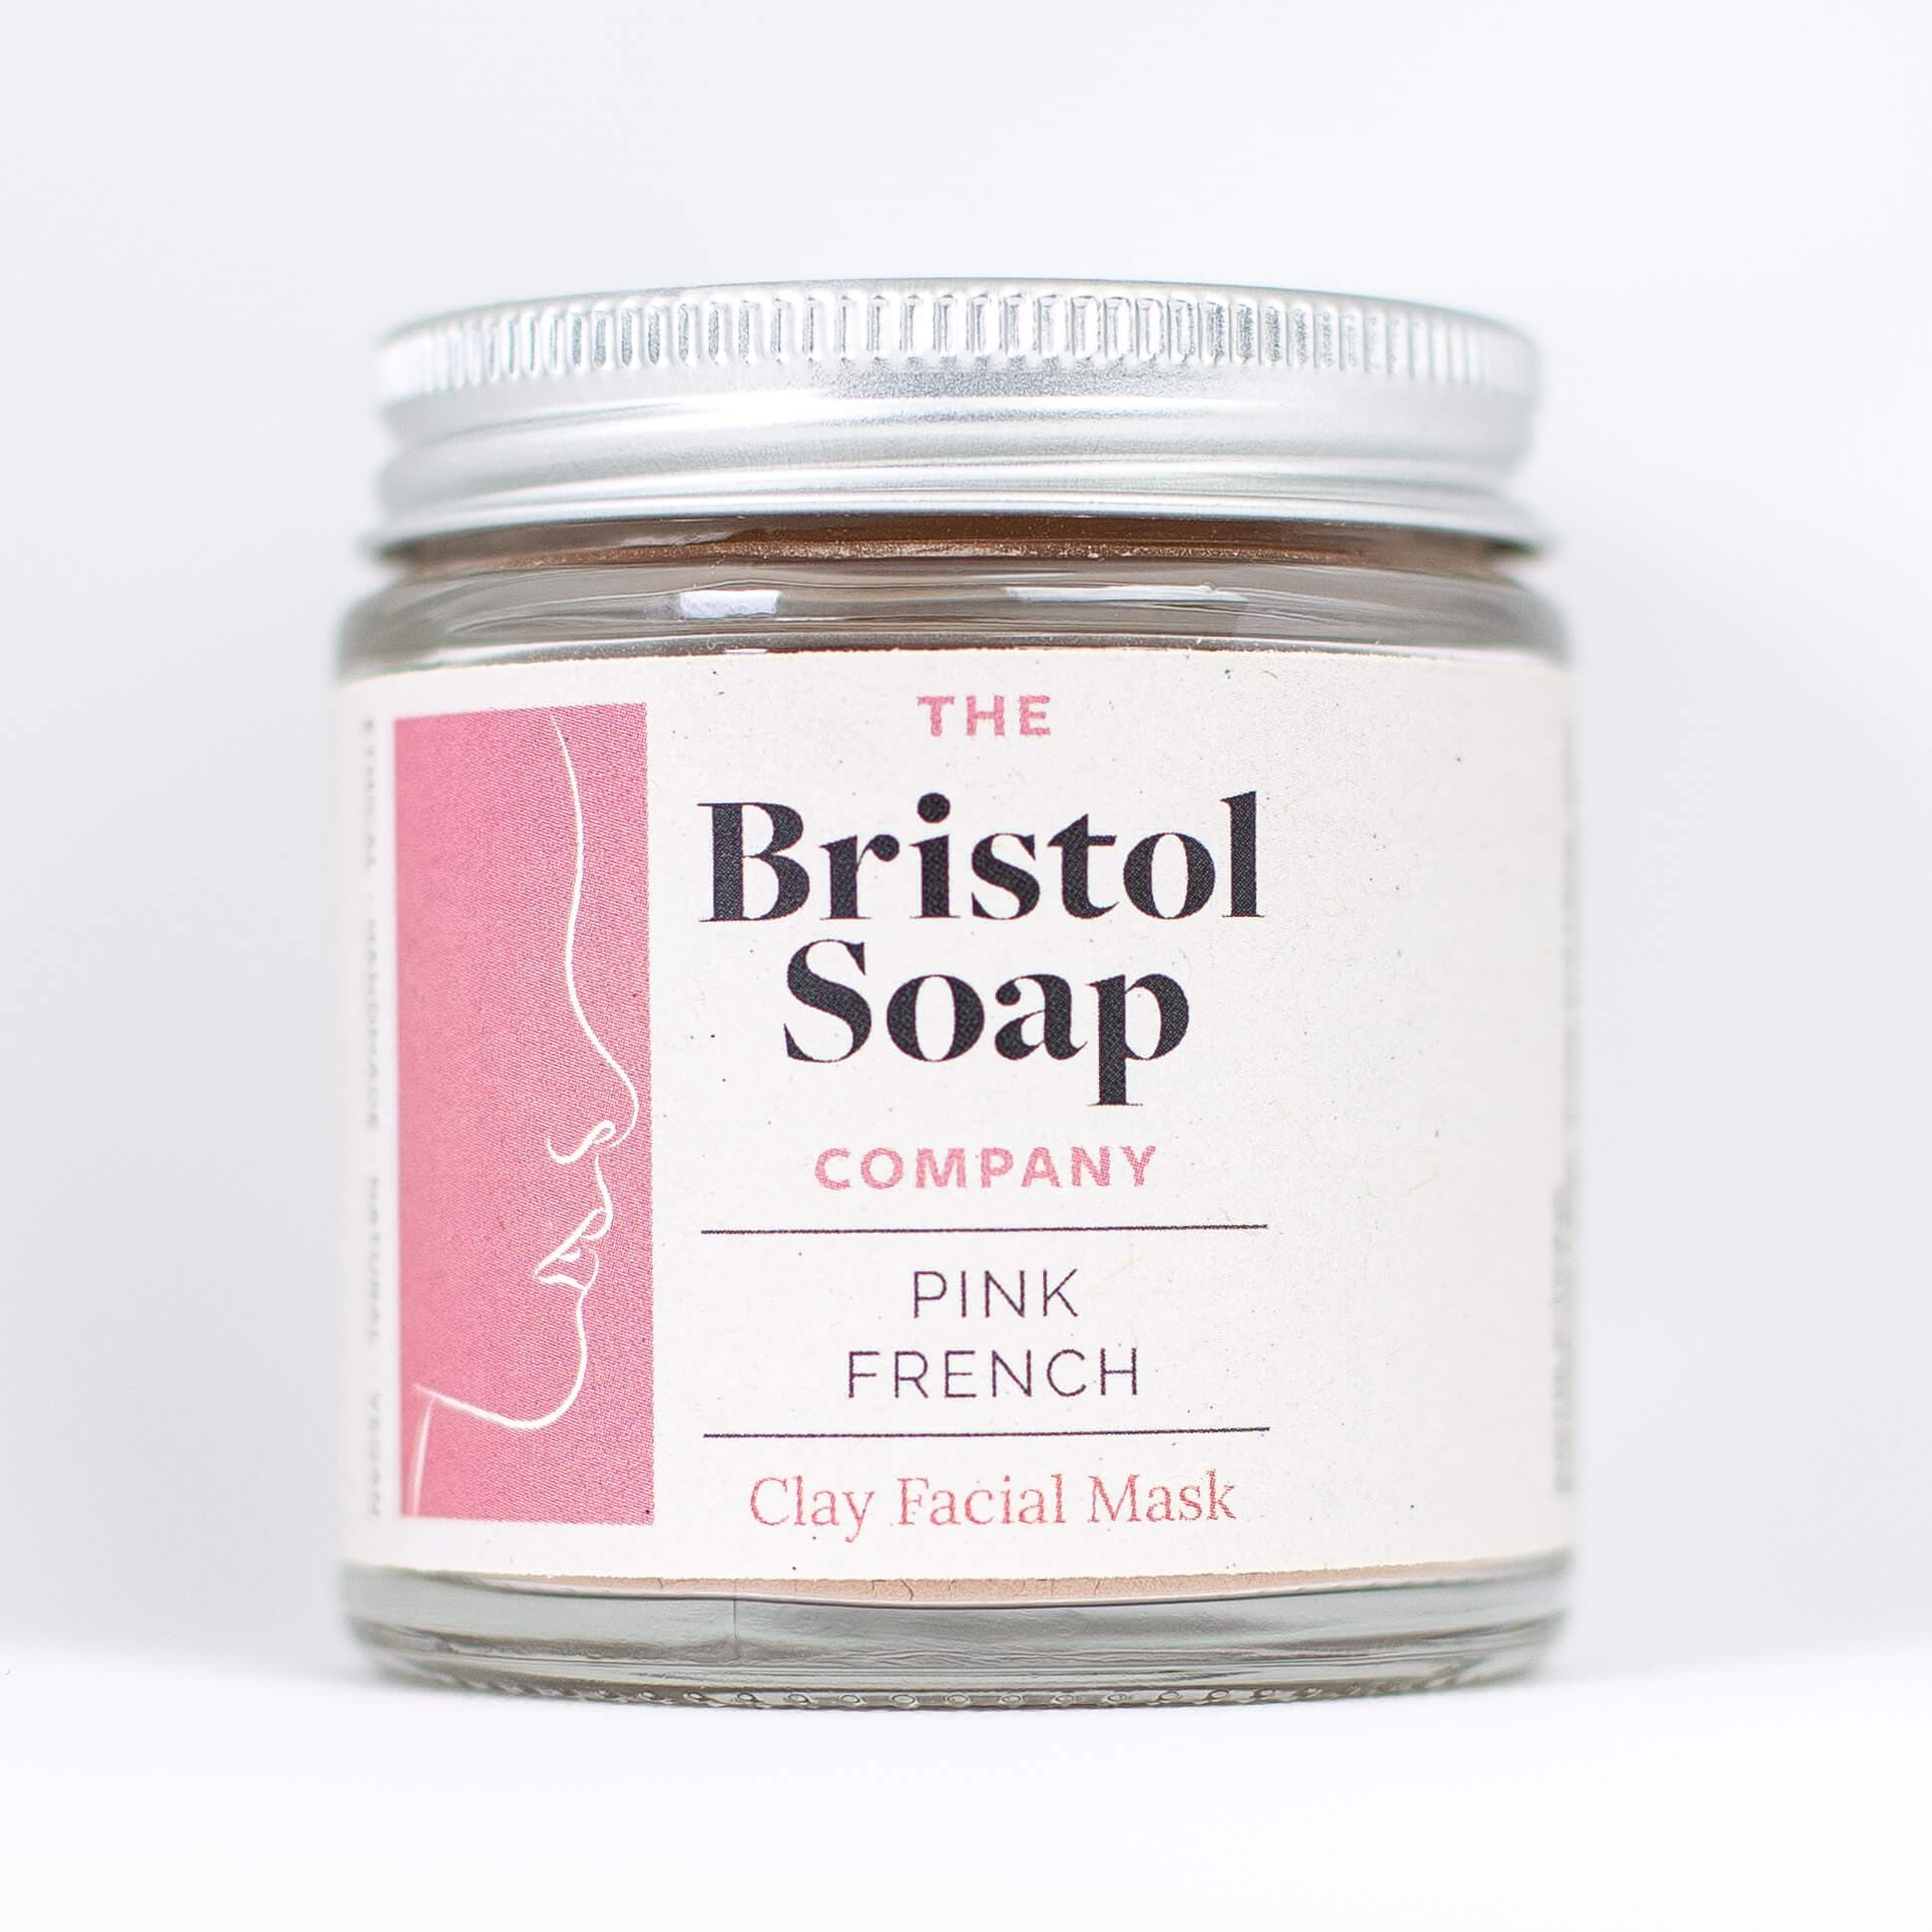 The Bristol Soap Company Face Mask Clay Face Mask (two blends)